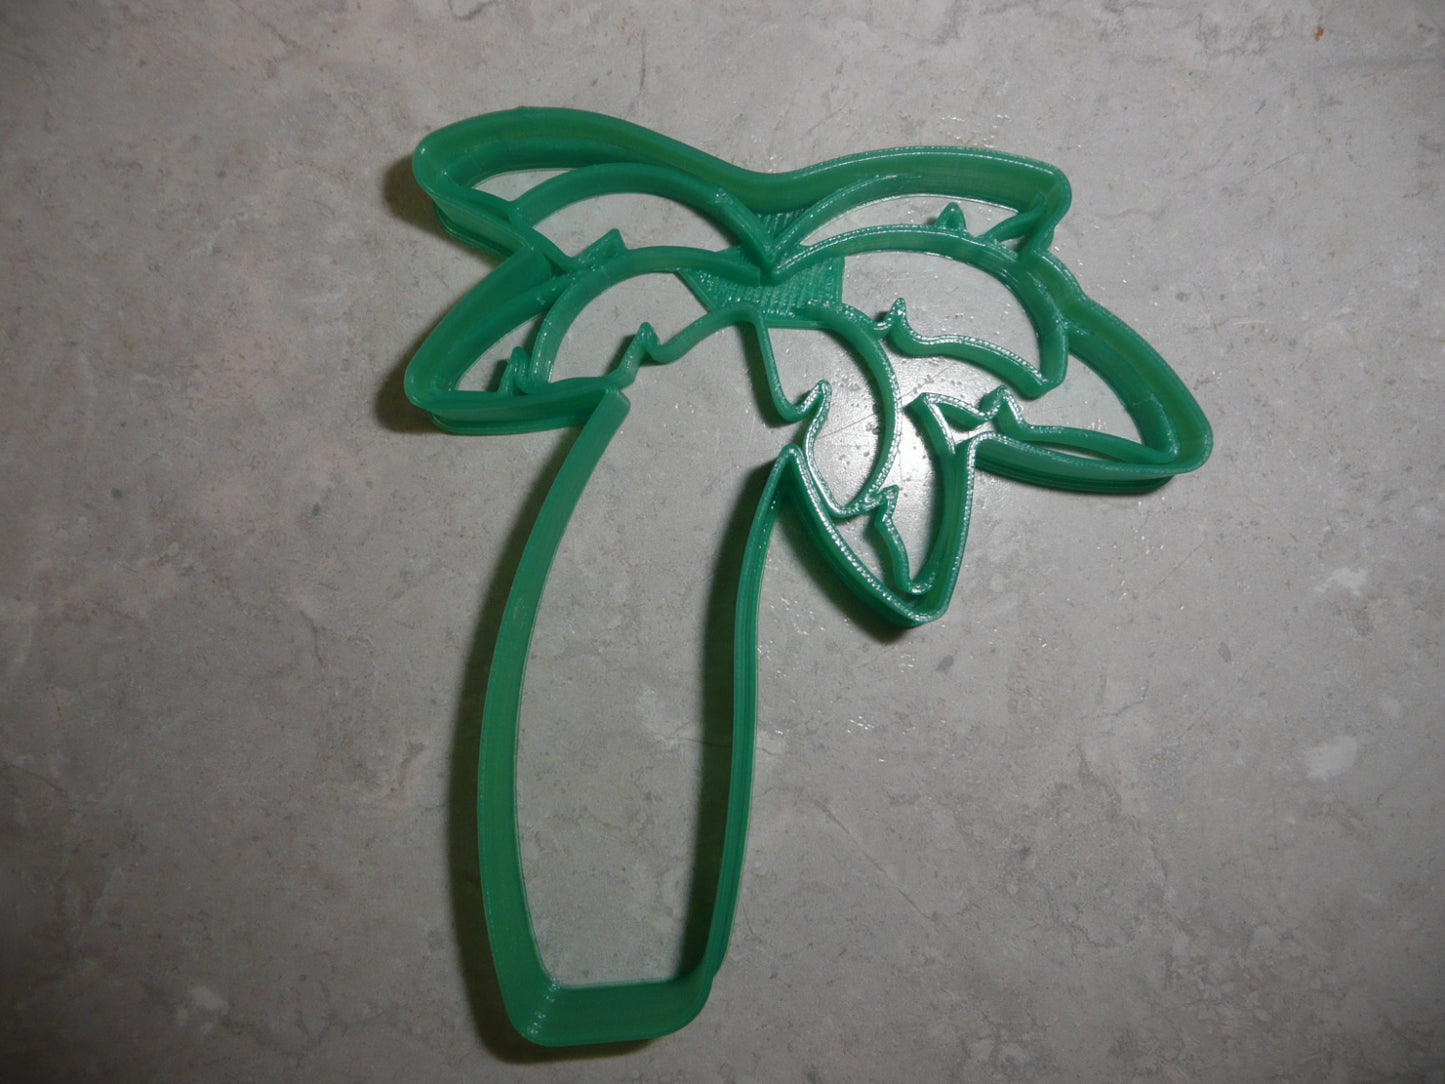 6x Palm Tree With Leaves Fondant Cutter Cupcake Topper 1.75 IN USA FD4967